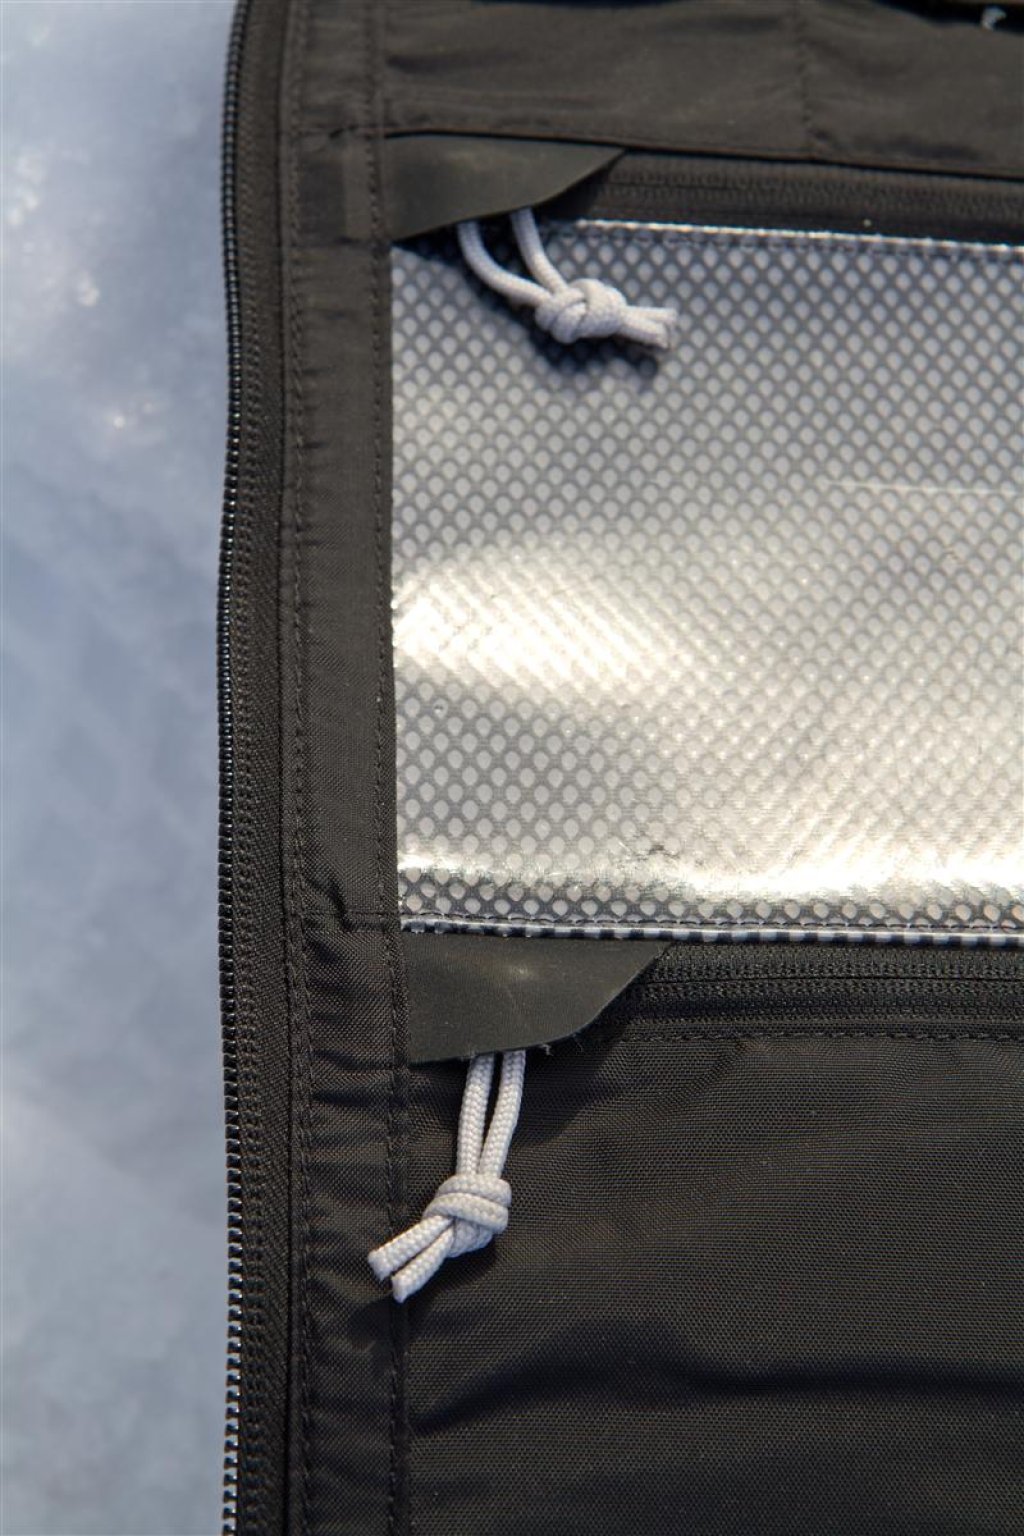 The flaps over the zippers protect the equipment from scratches without interfering with handling